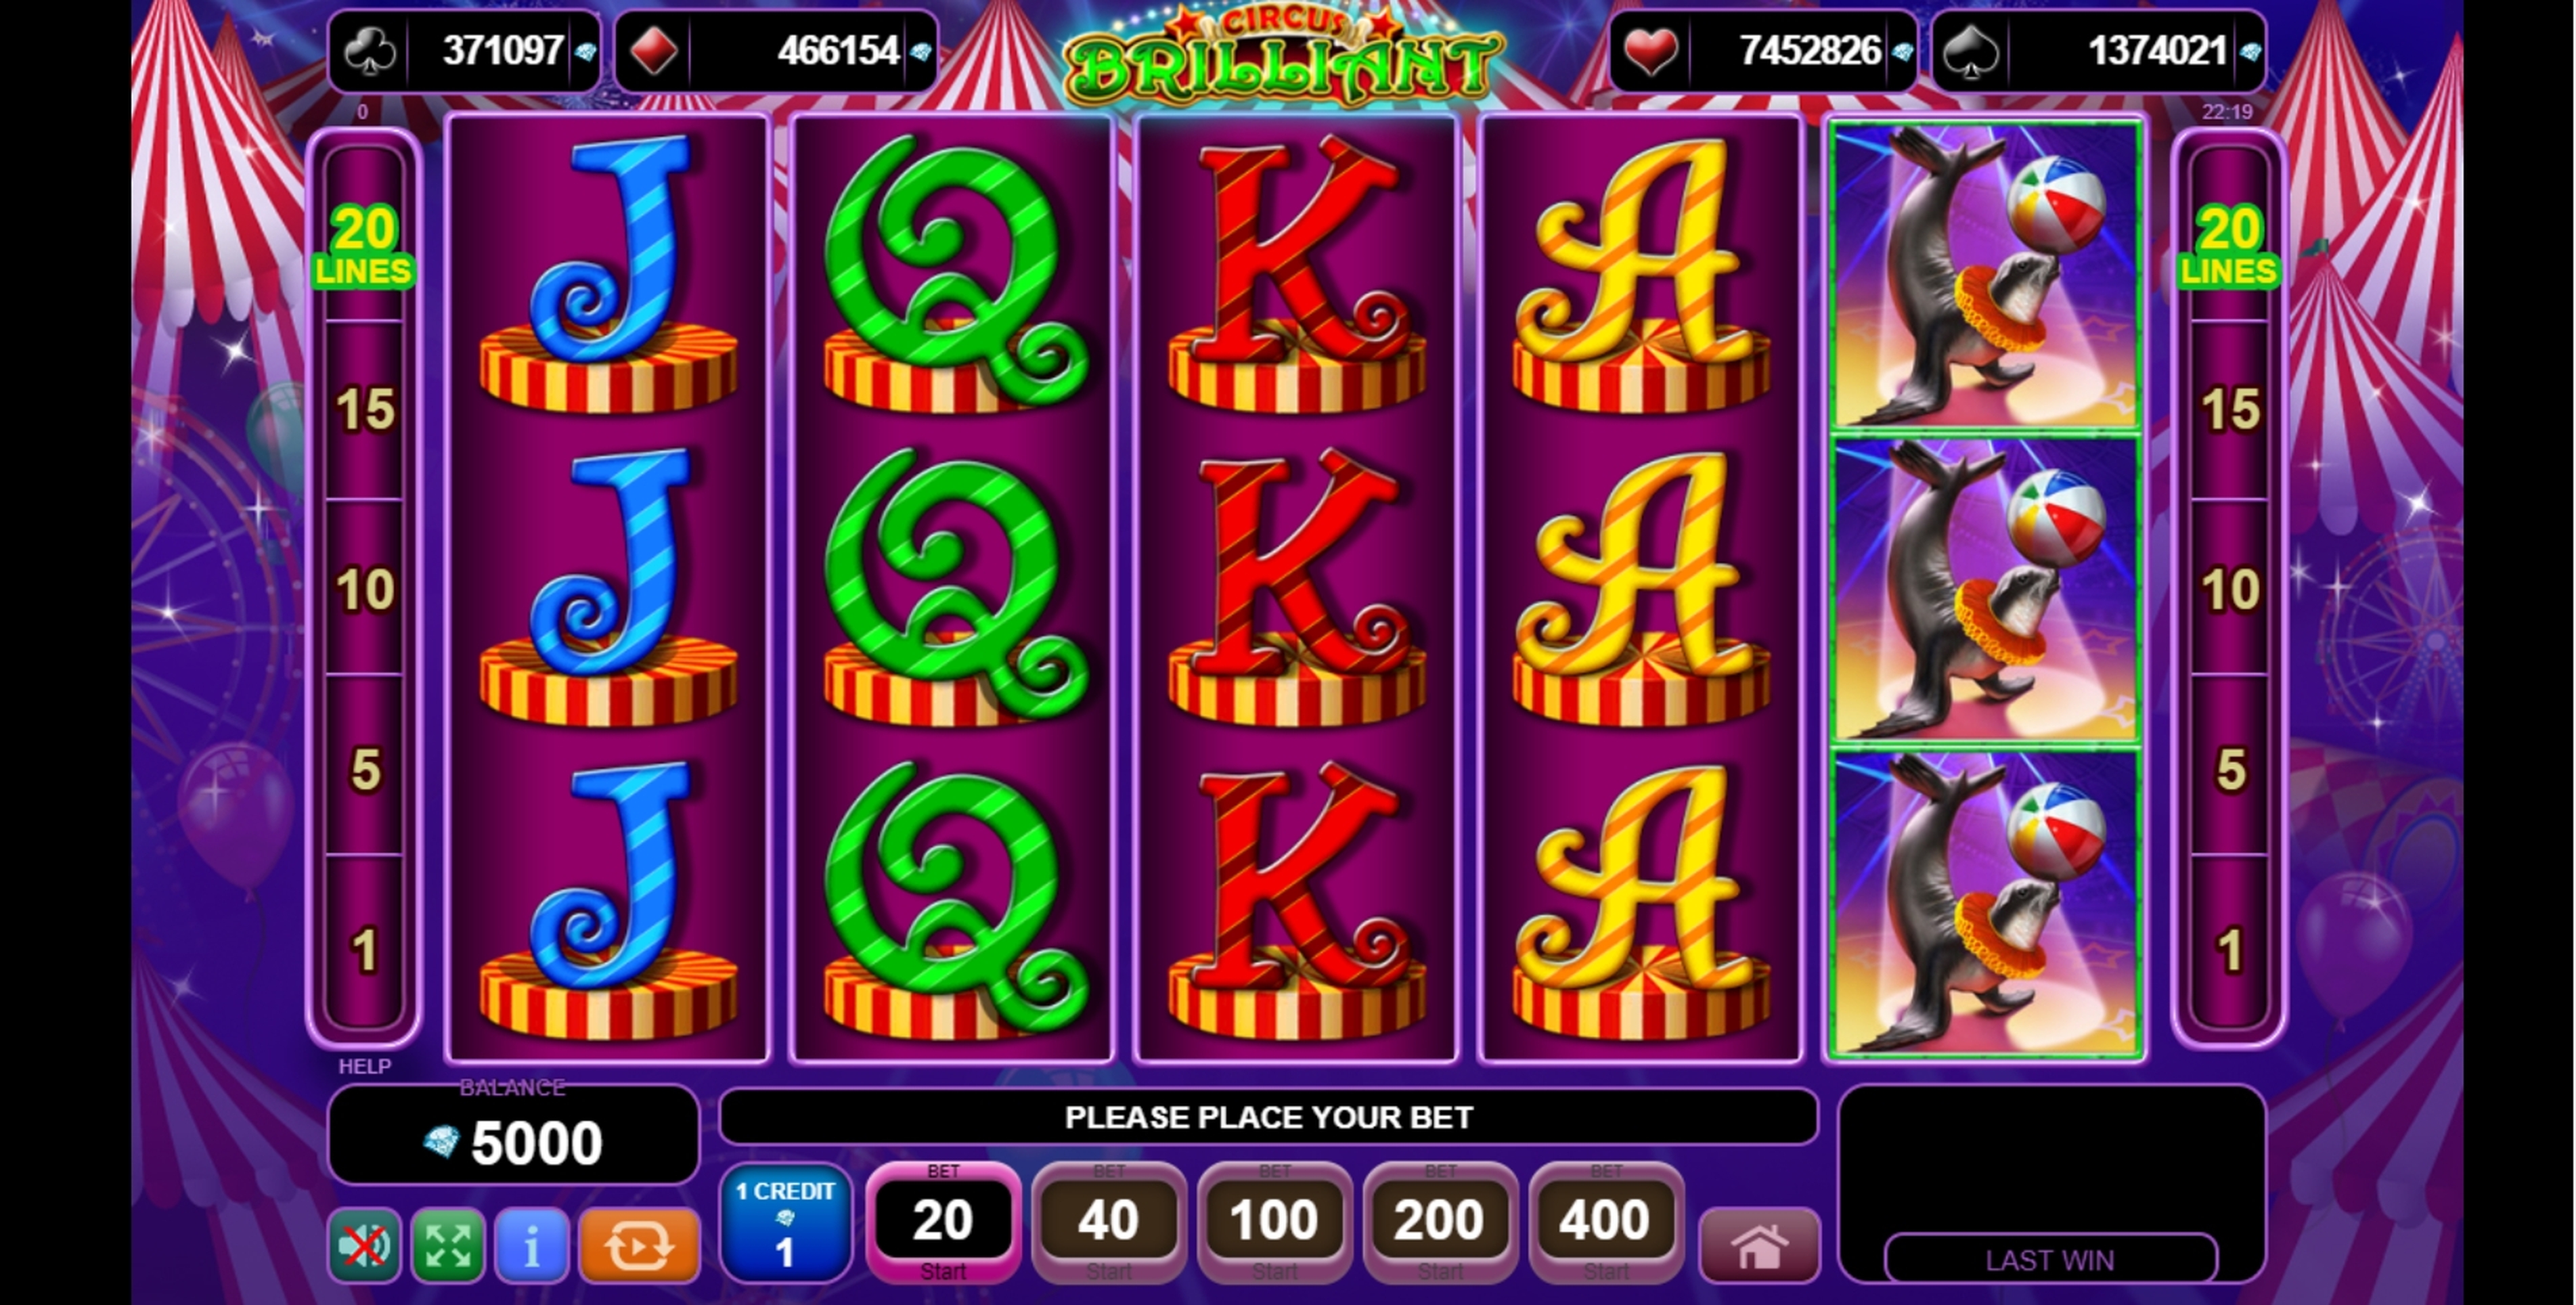 Reels in Circus Brilliant Slot Game by EGT